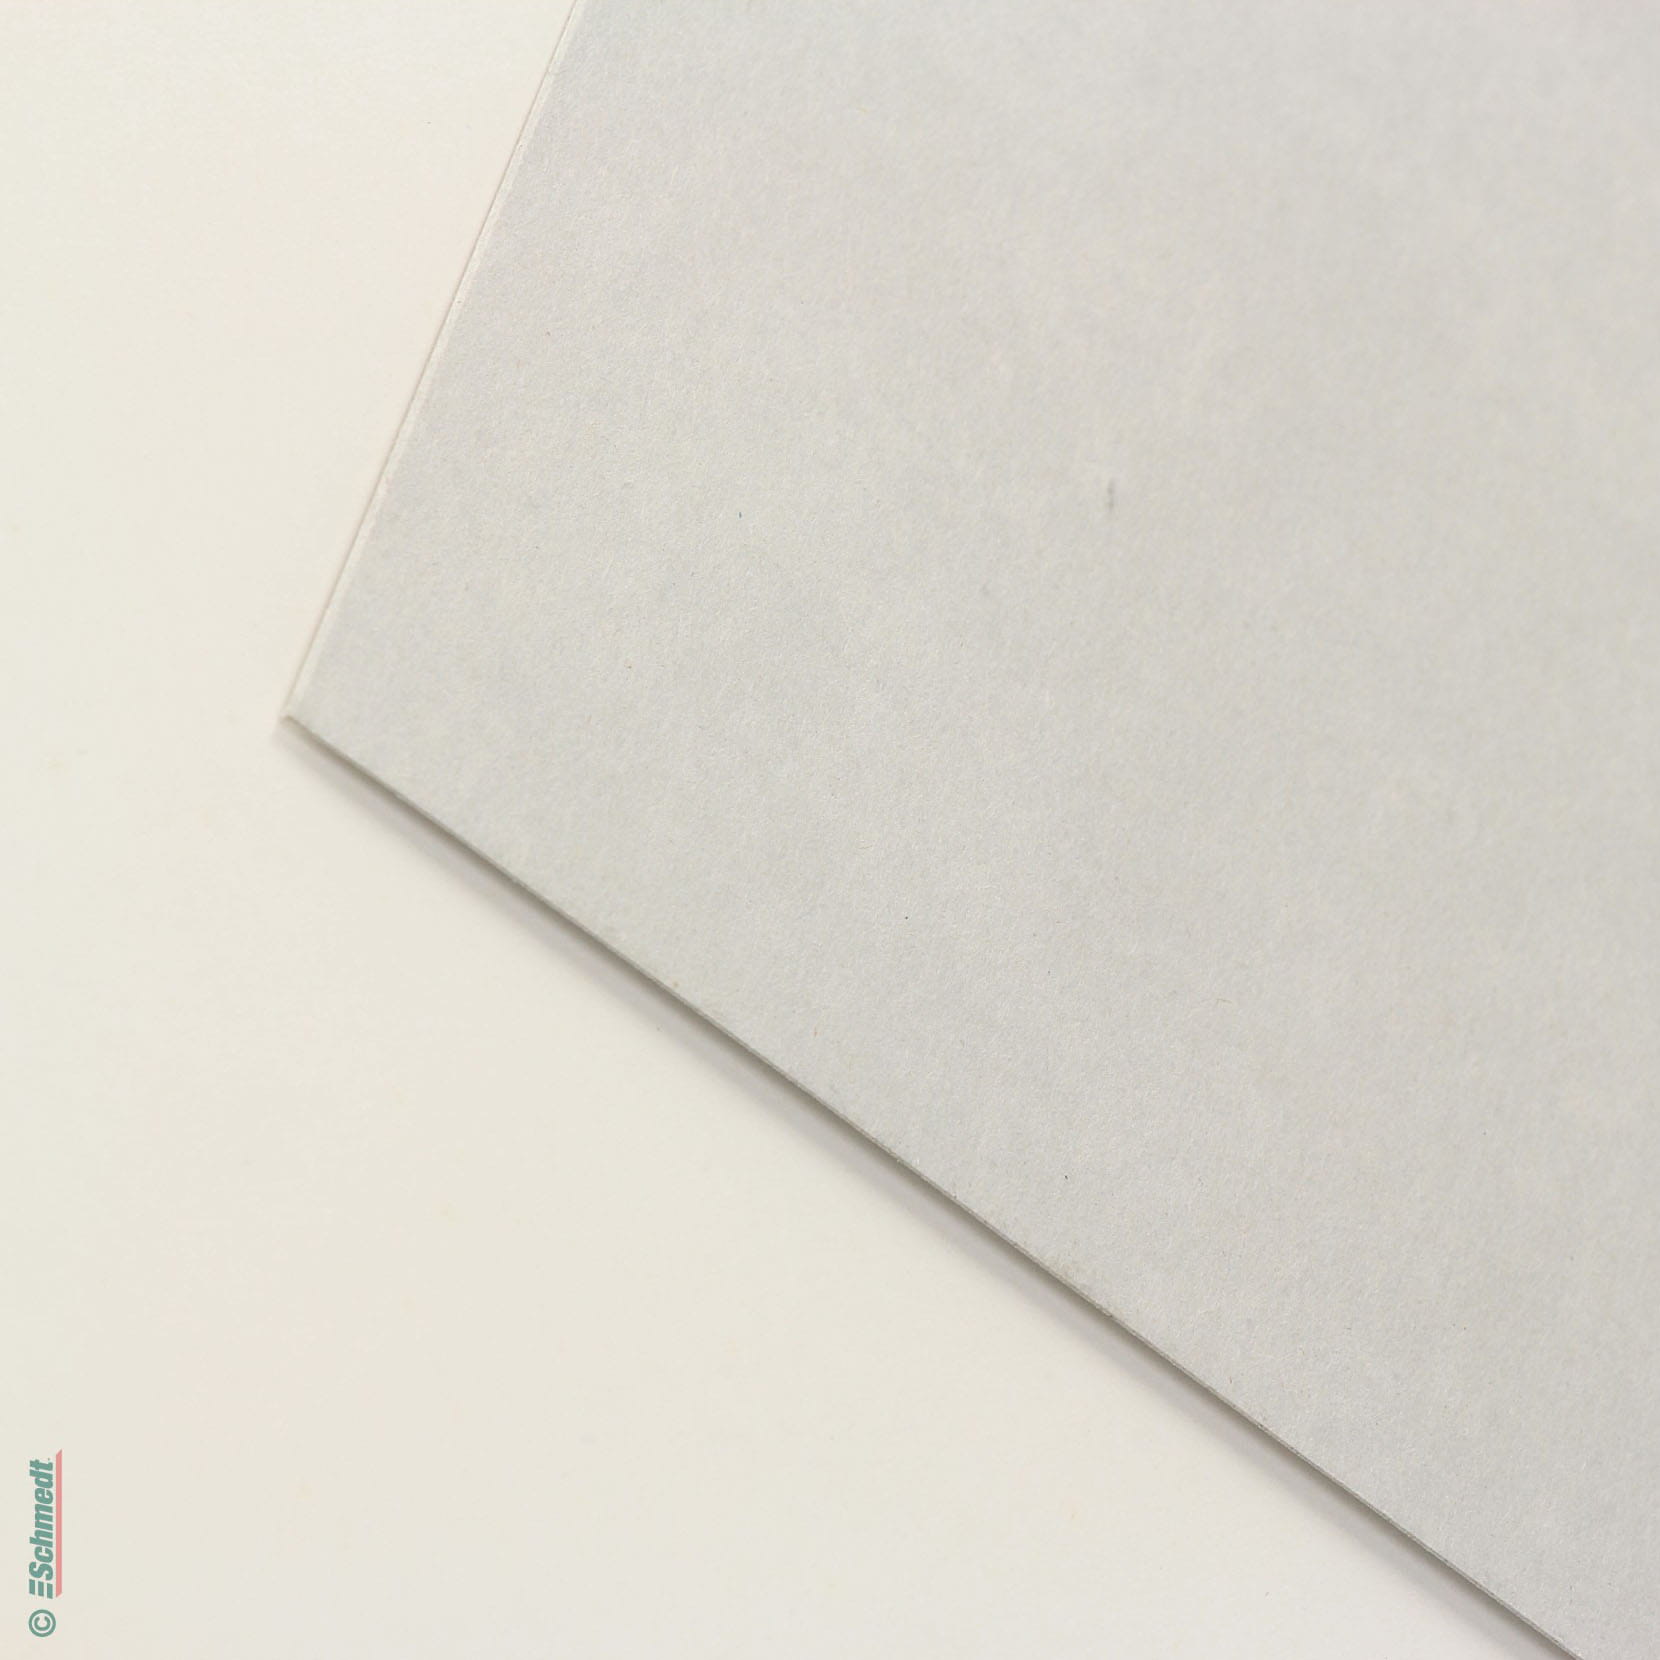 Chipboard 1000gsm / 1200gsm> Size A3 / A4 hardcover book binding grey straw  board DIY handmade craft modelling material